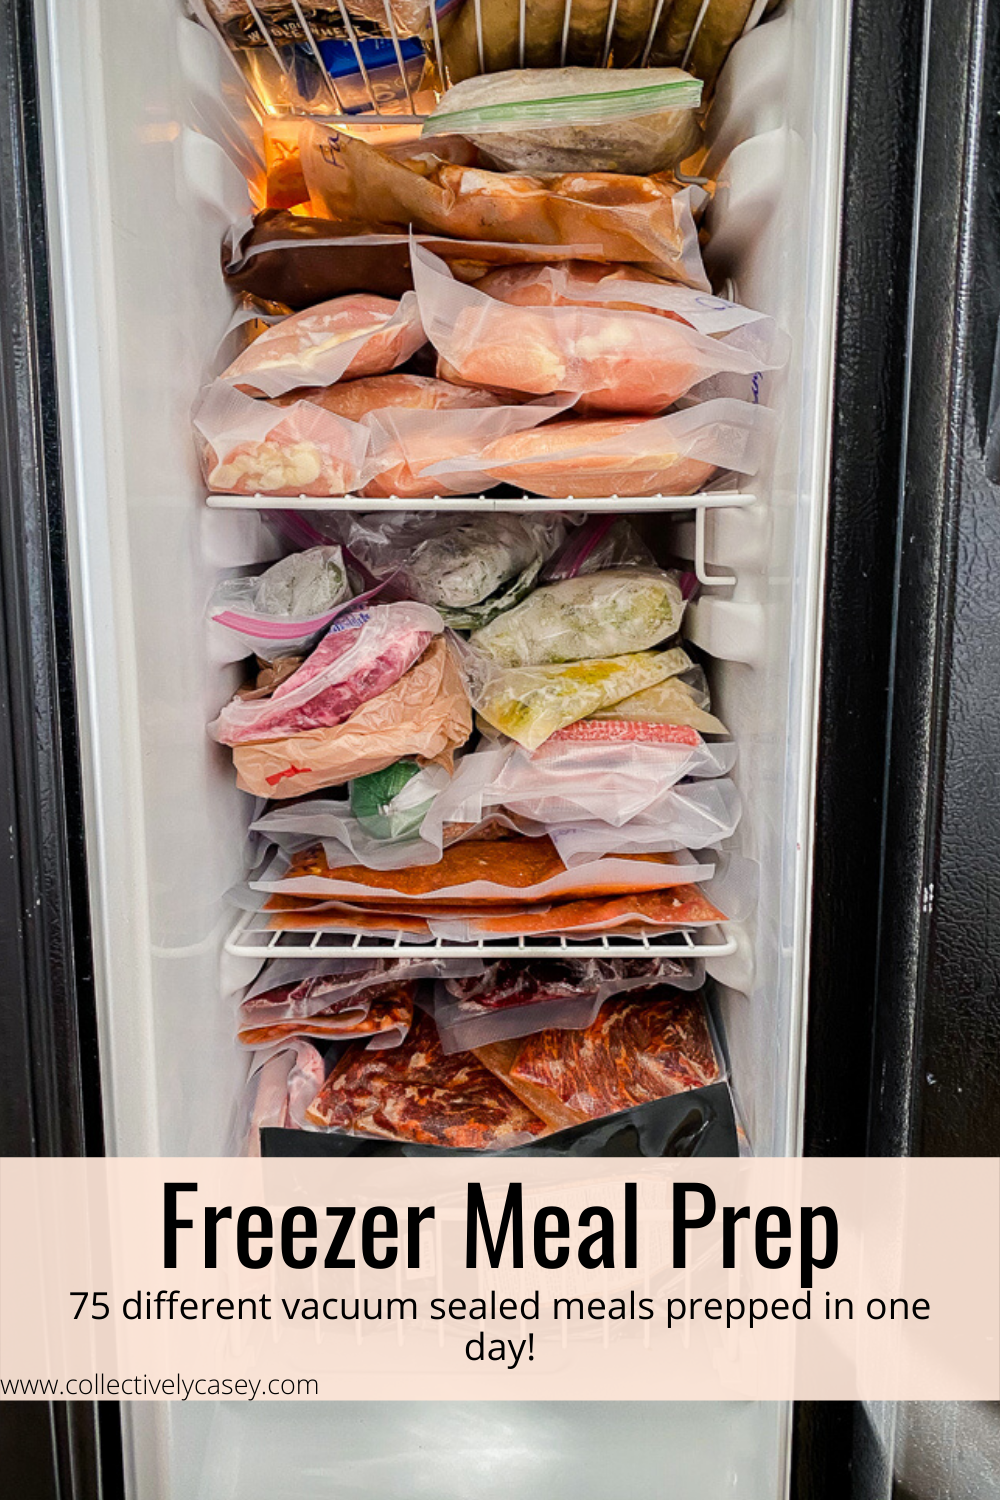 Freezer Meal Prep - Collectively Casey